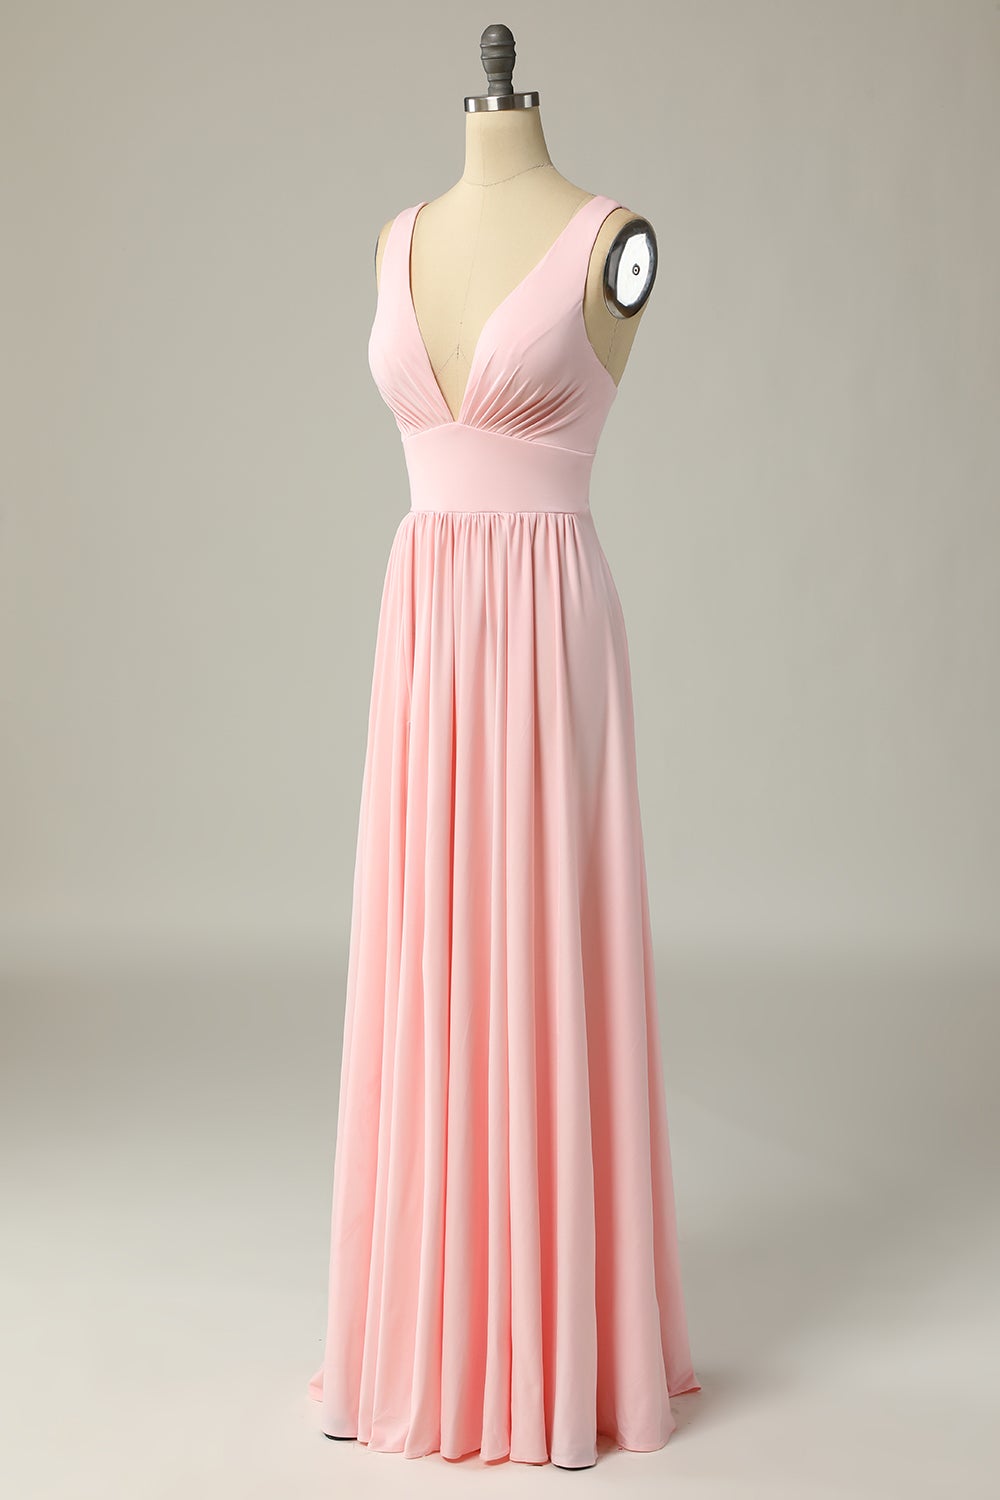 Open Back Prom Dress, Classic Pink Long Prom Dress with Split Front